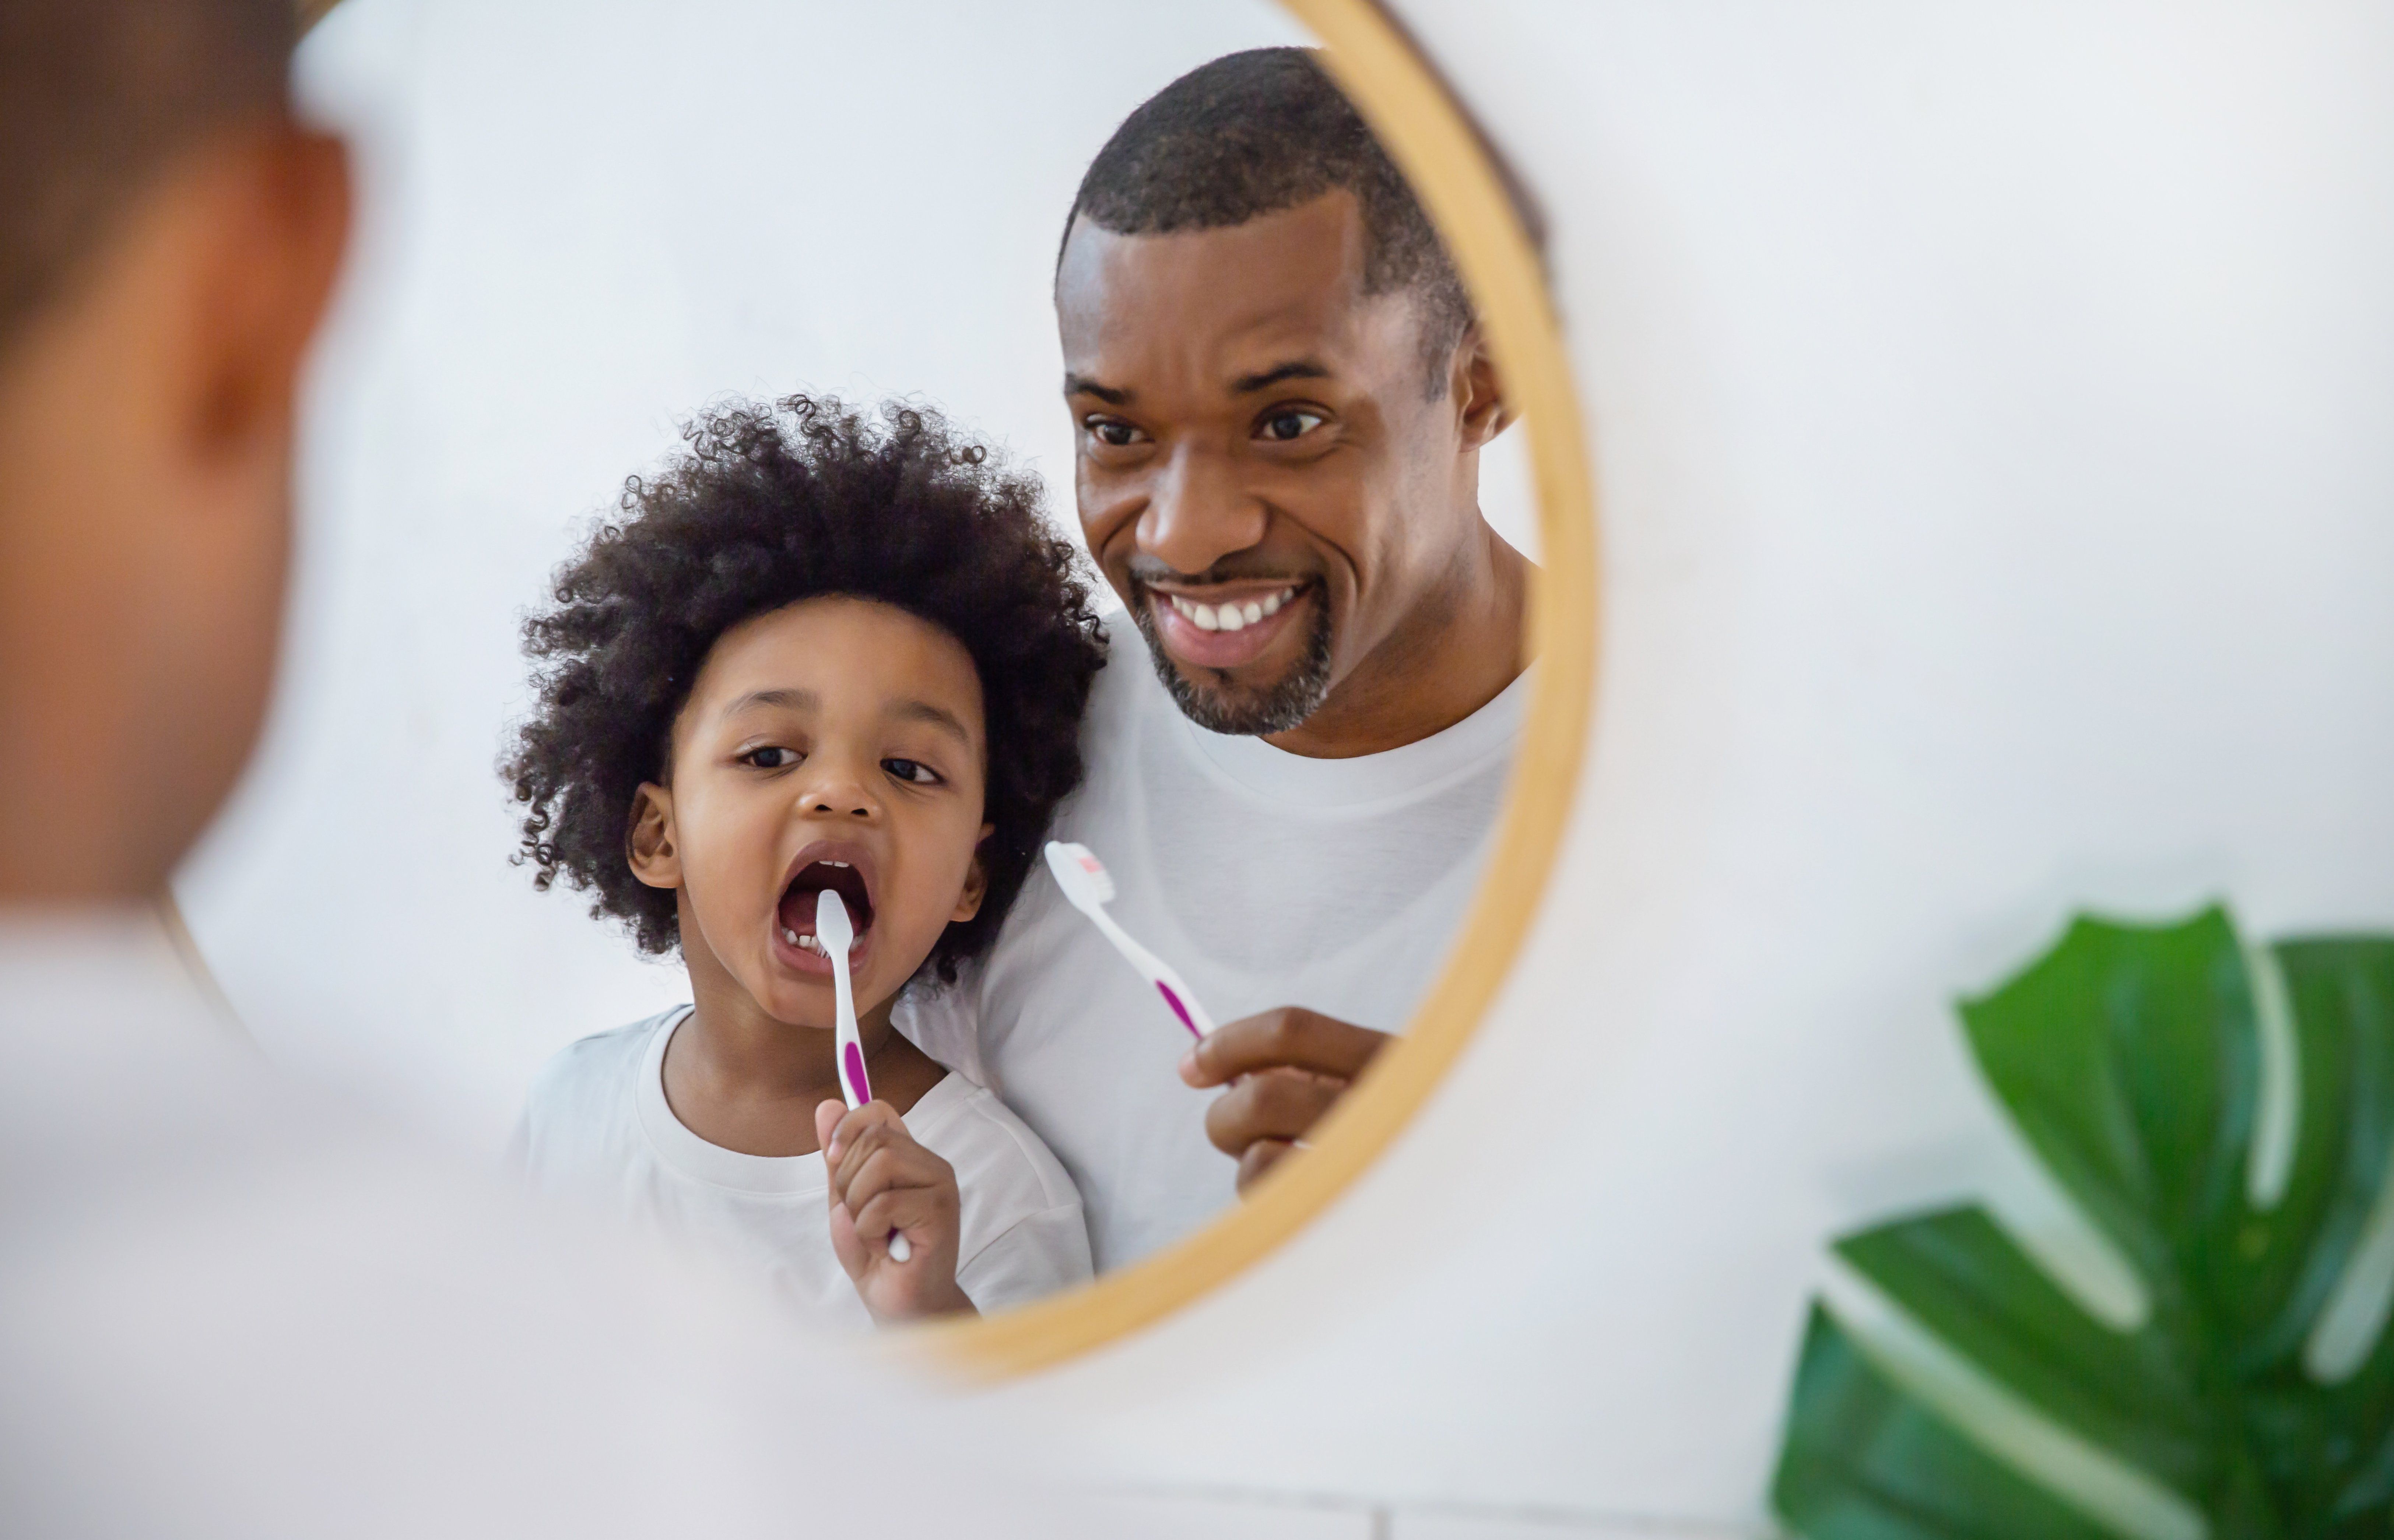 Teaching Your Child Good Oral Habits From an Early Age